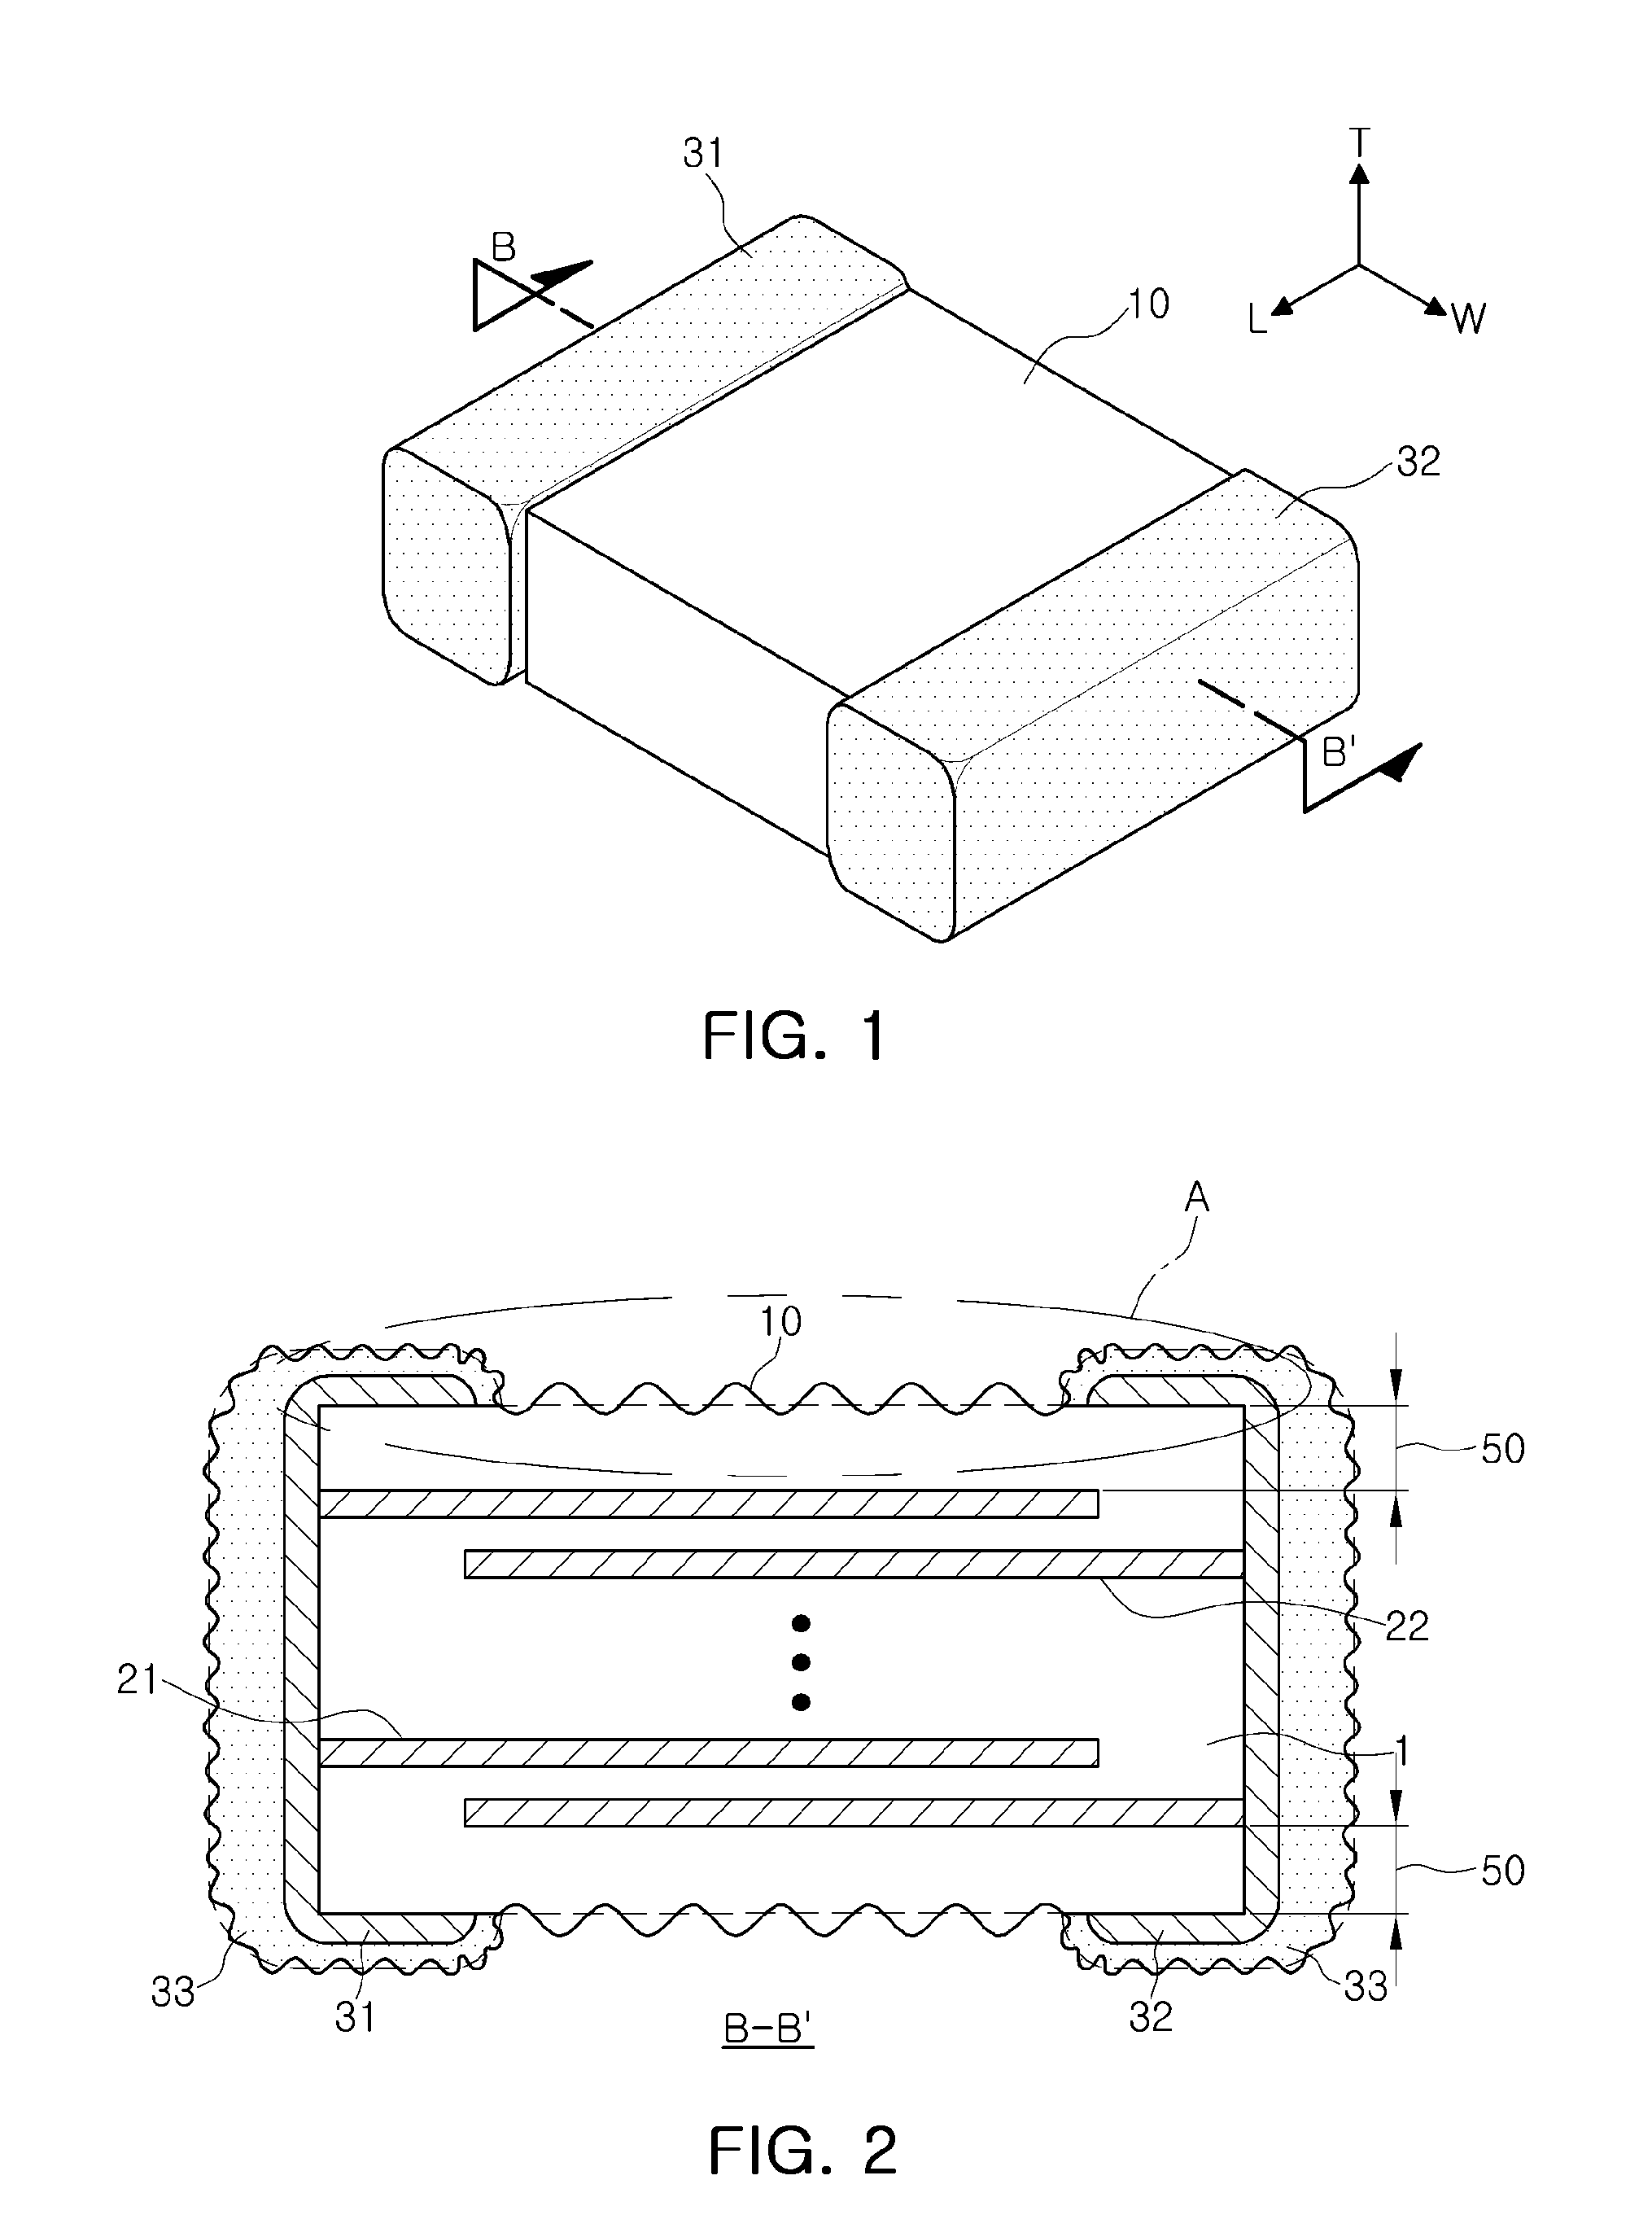 Embedded multilayer ceramic electronic component and method of manufacturing the same, and printed circuit board having embedded multilayer ceramic electronic component therein